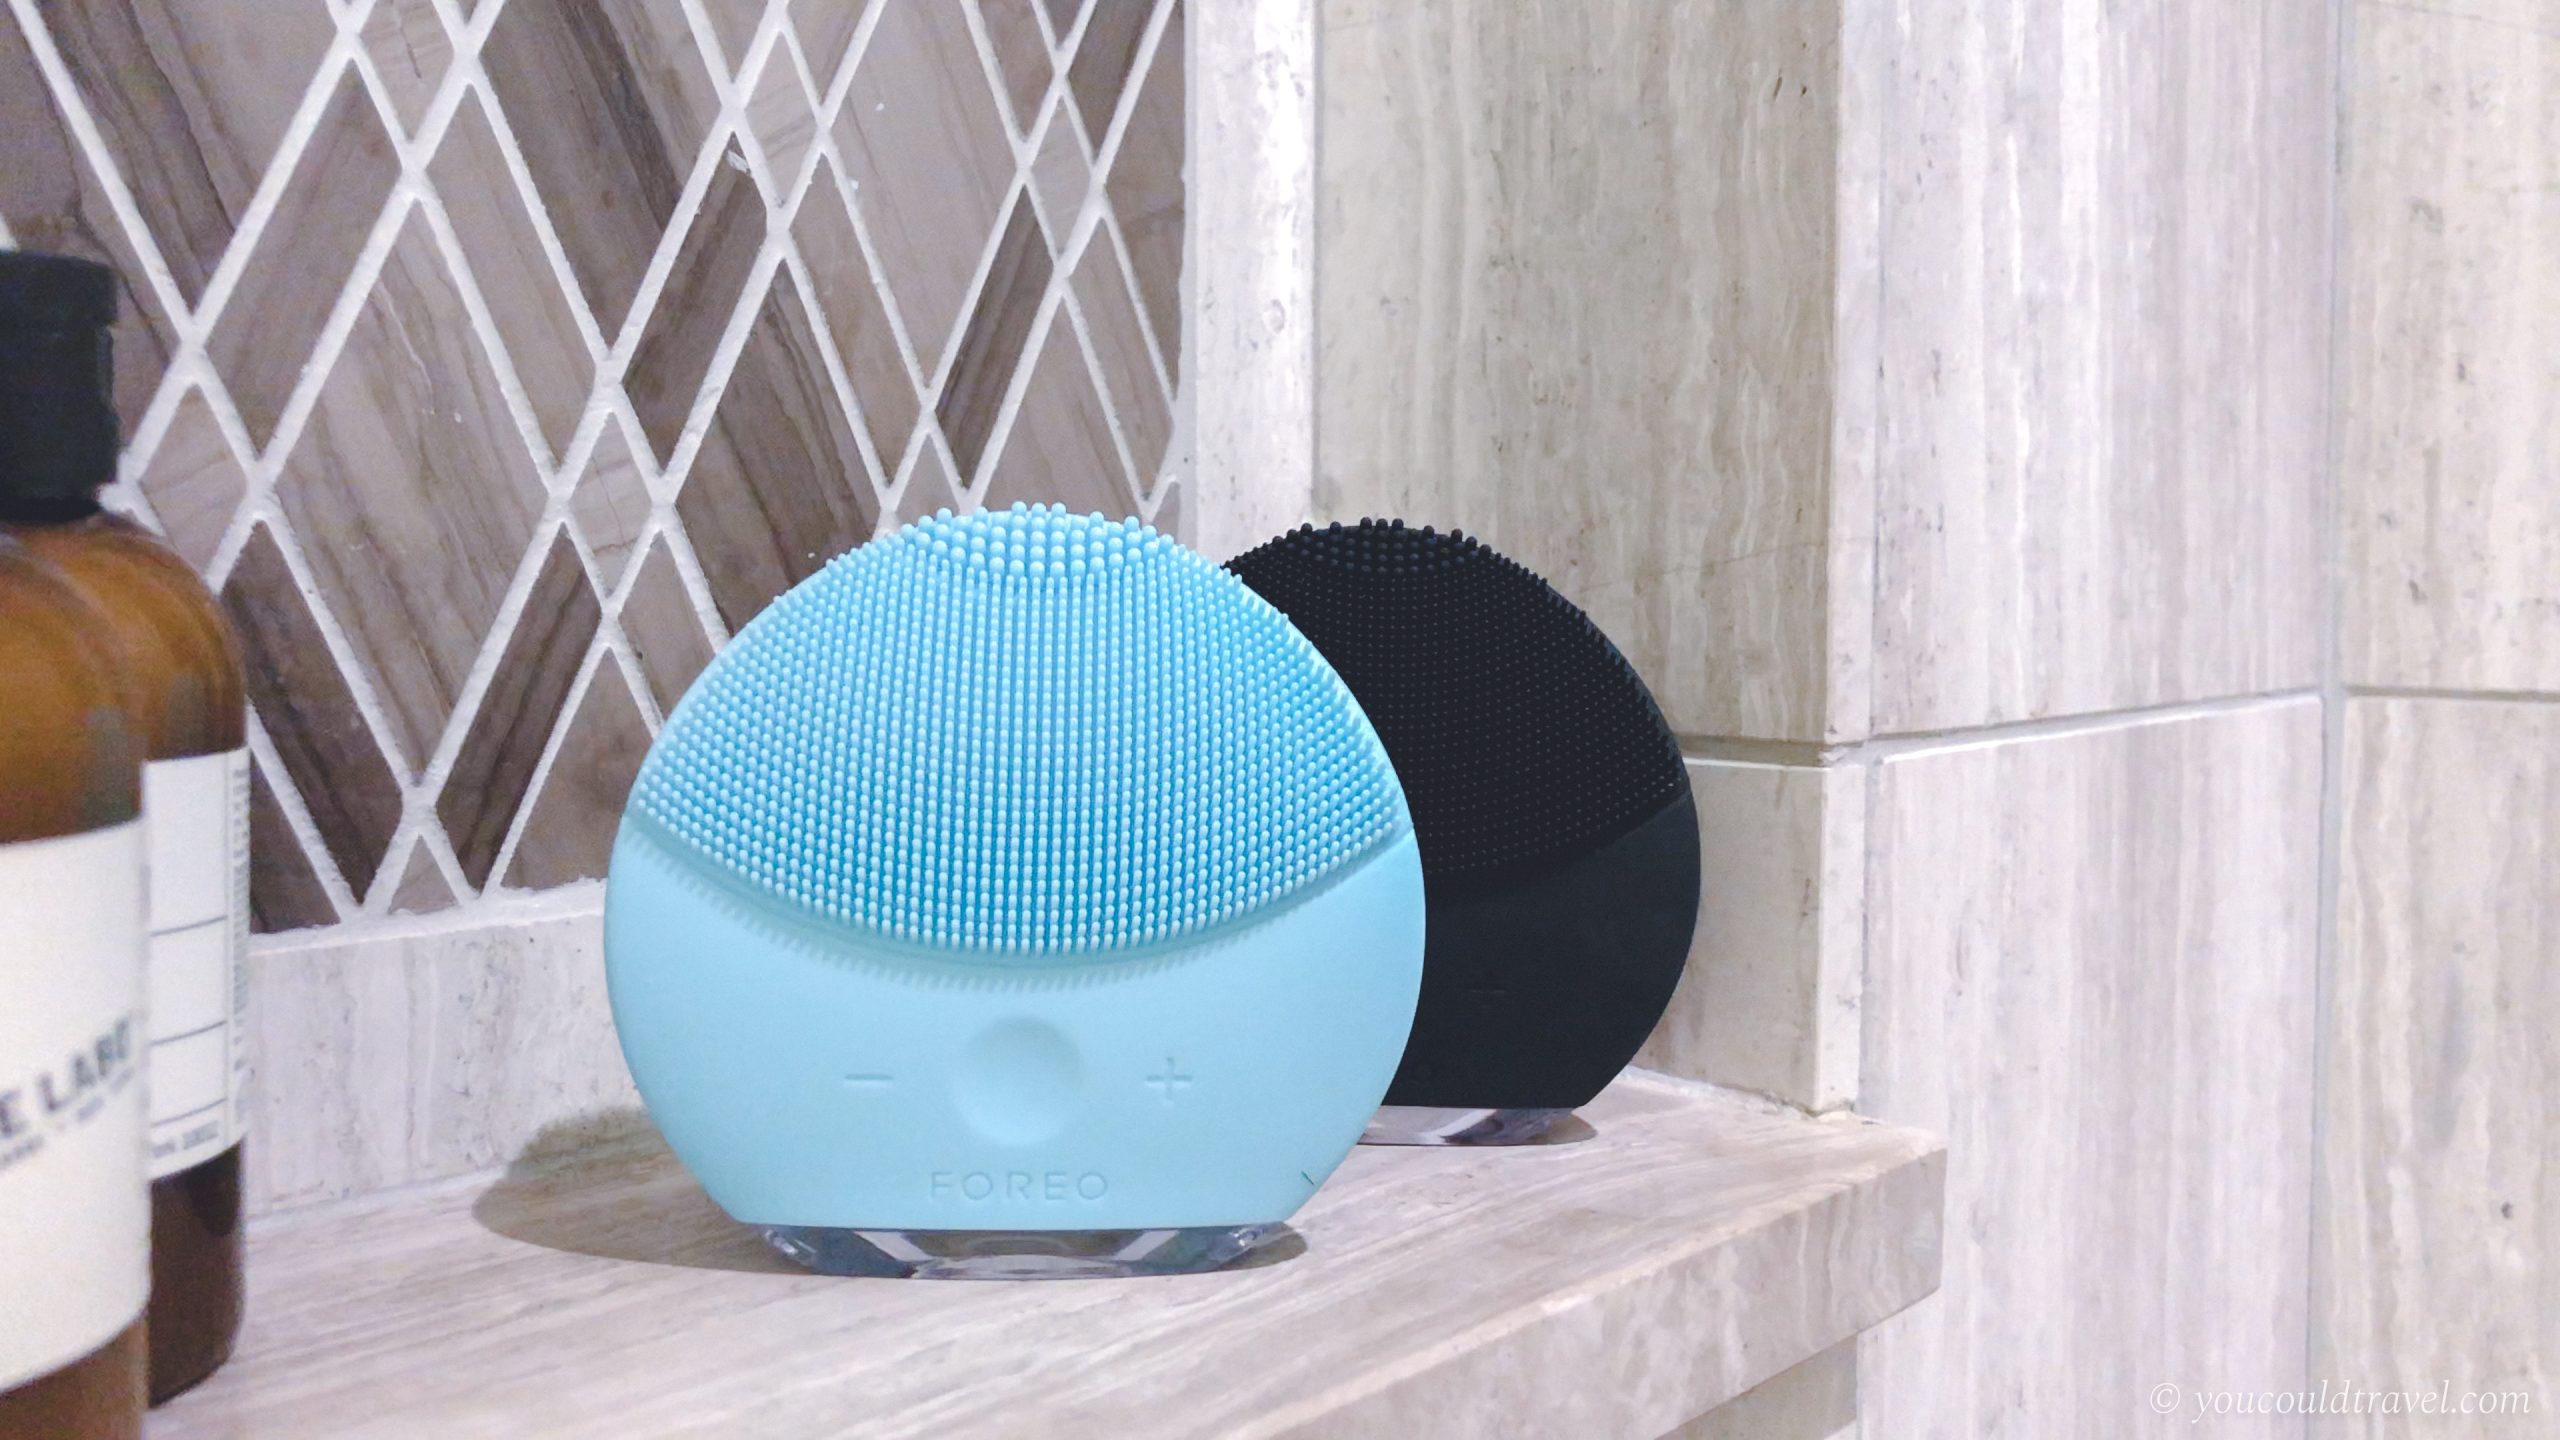 LUNA mini 2 is a face cleansing brush, which comes with 8 adjustable intensities to deep clean the skin